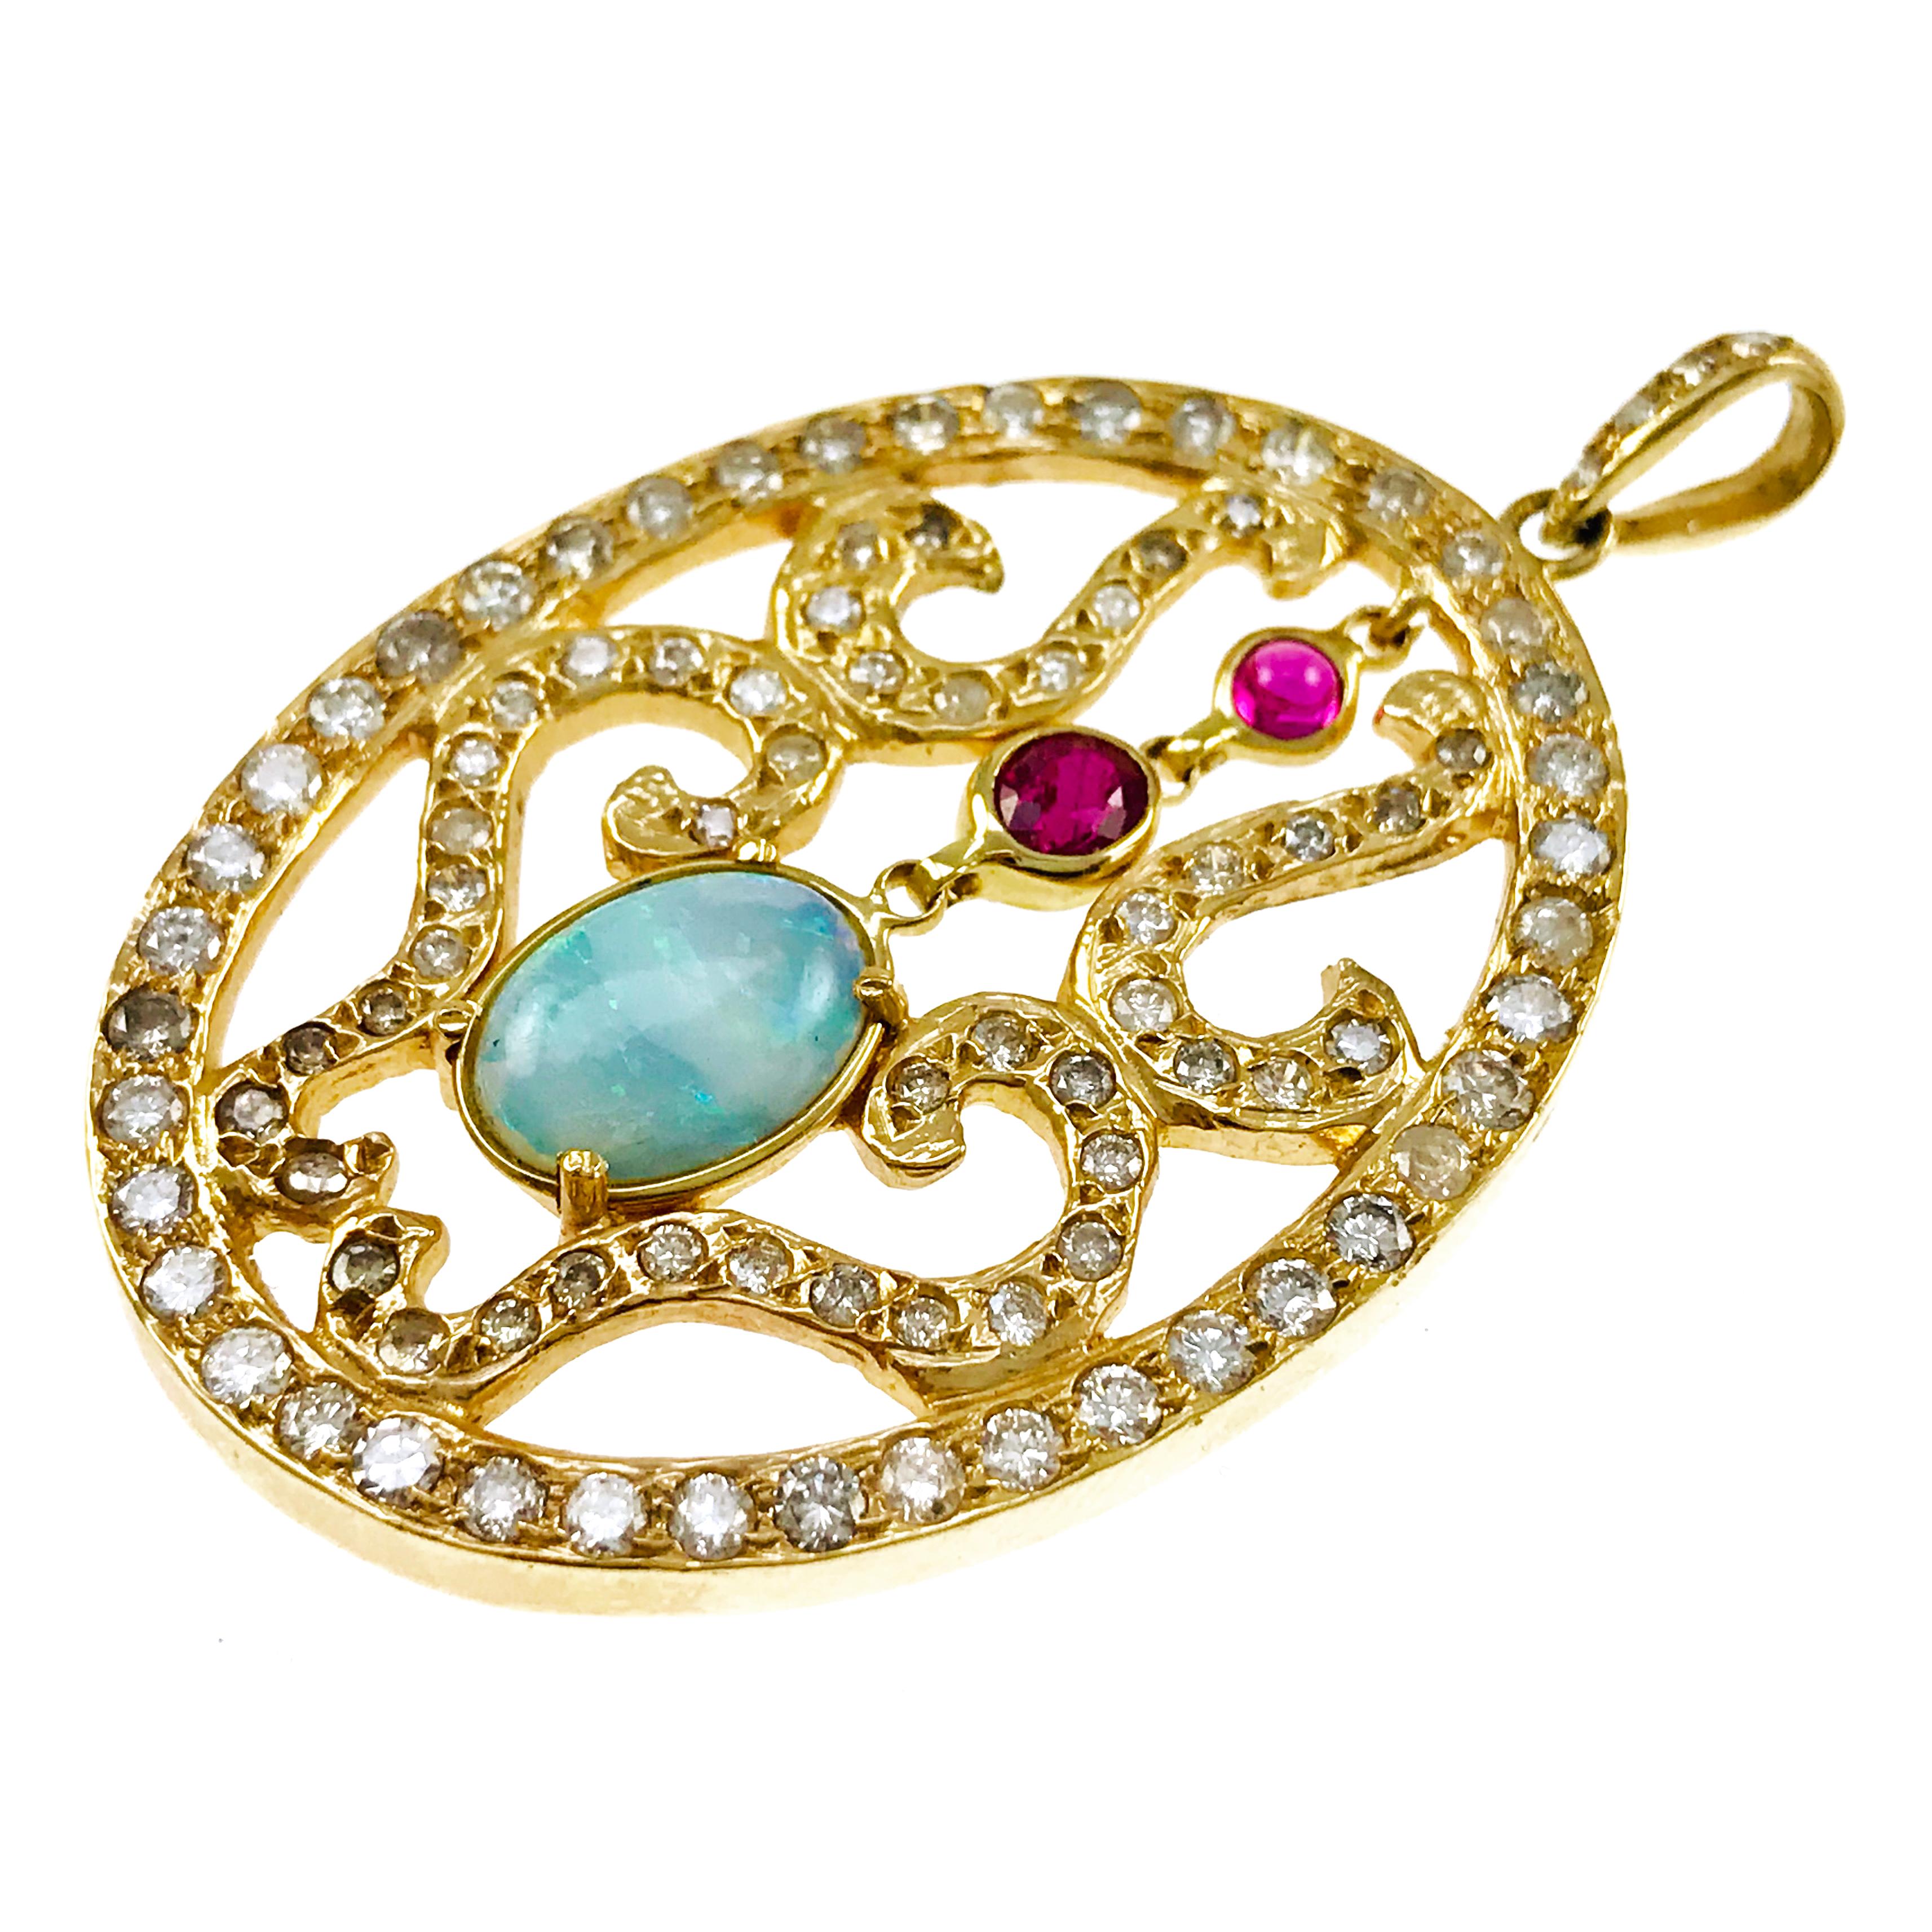 Large Opal Ruby Diamond Pendant. Oval Opal and Round Rubies are the stars of this dazzling pendant. The Opal is 10x7mm, faceted Ruby is 4.x3 mm and Ruby cabochon is 2.5 mm. Swirls of gold frame the gemstones and a sparkling oval of diamonds surround